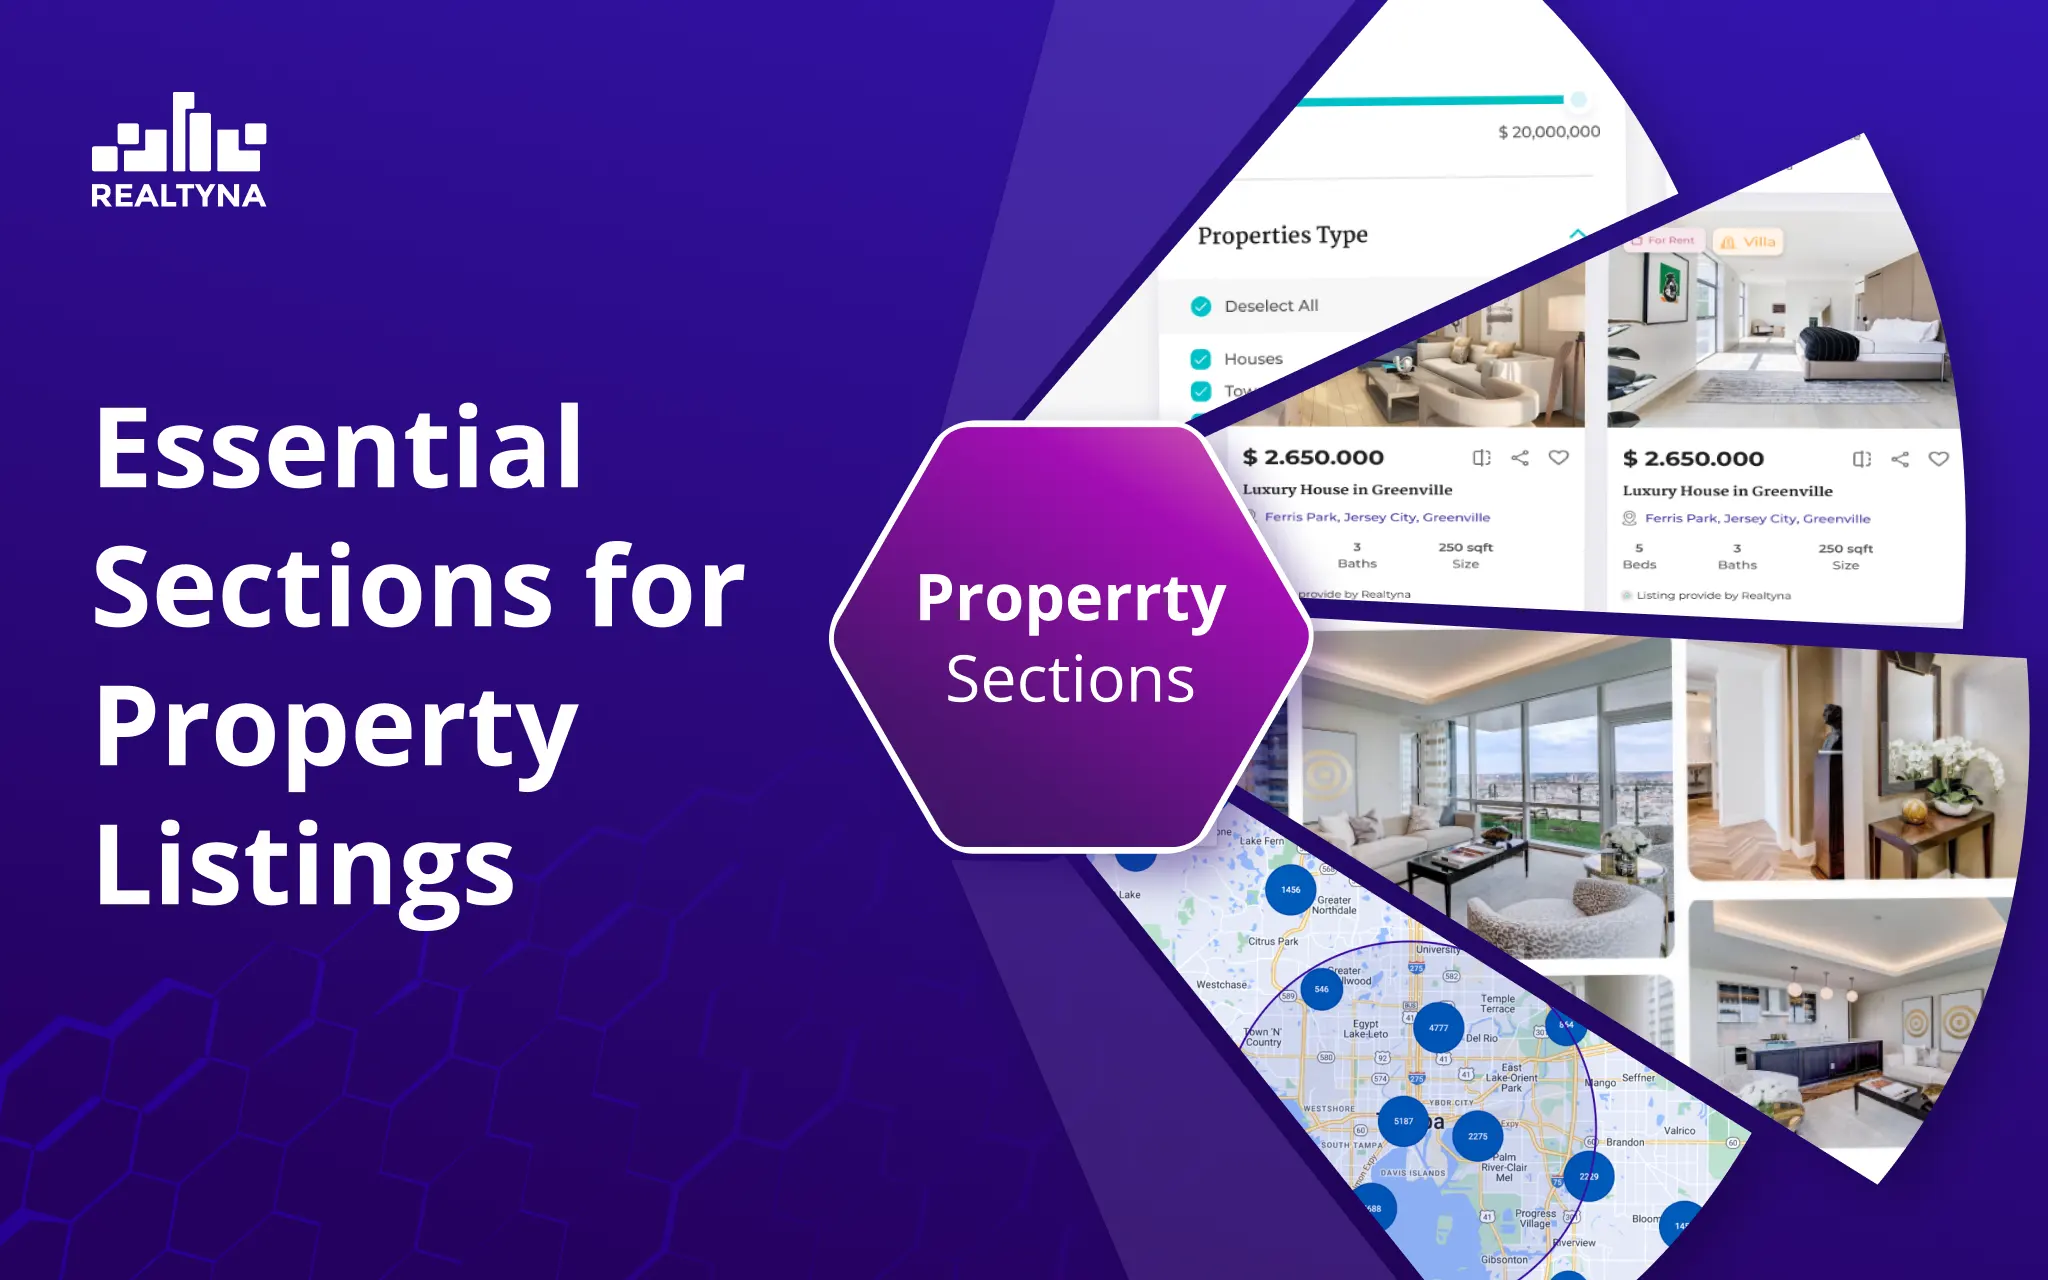 Essential Sections for Property Listings